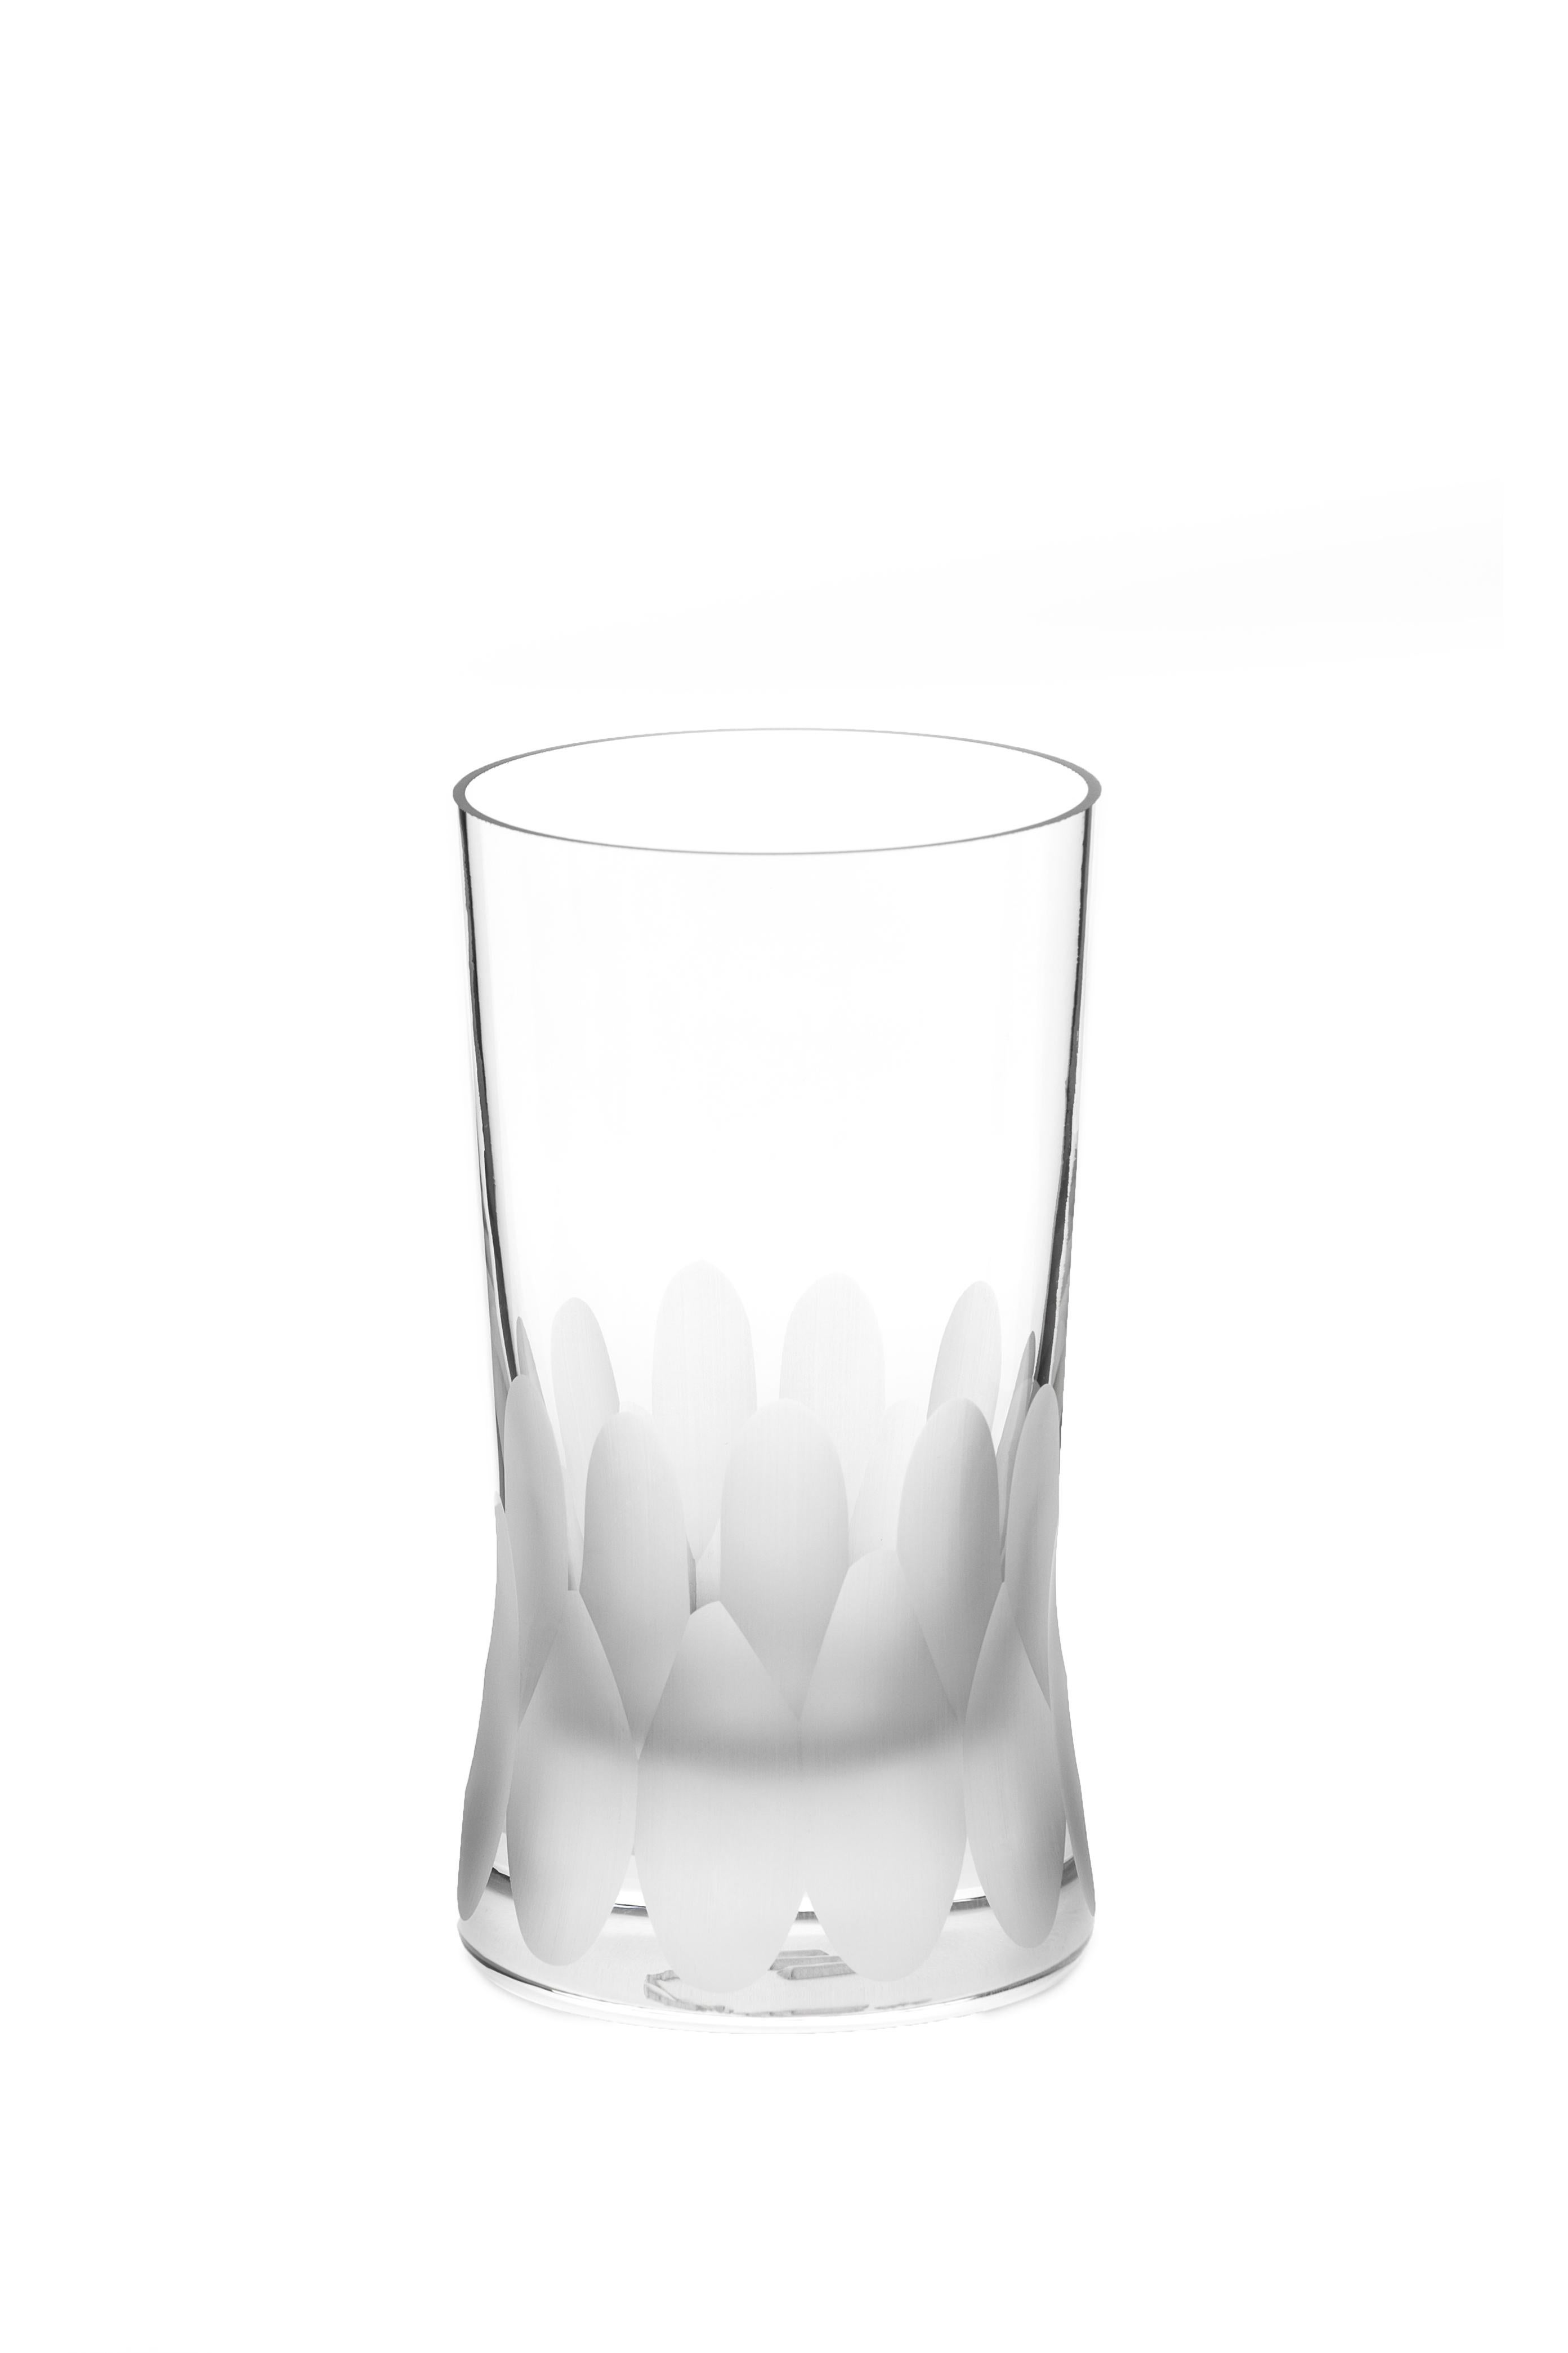 Martino Gamper Handmade Irish Crystal Large Tumbler Glass Cuttings Series CUT I In New Condition For Sale In Ballyduff, IE